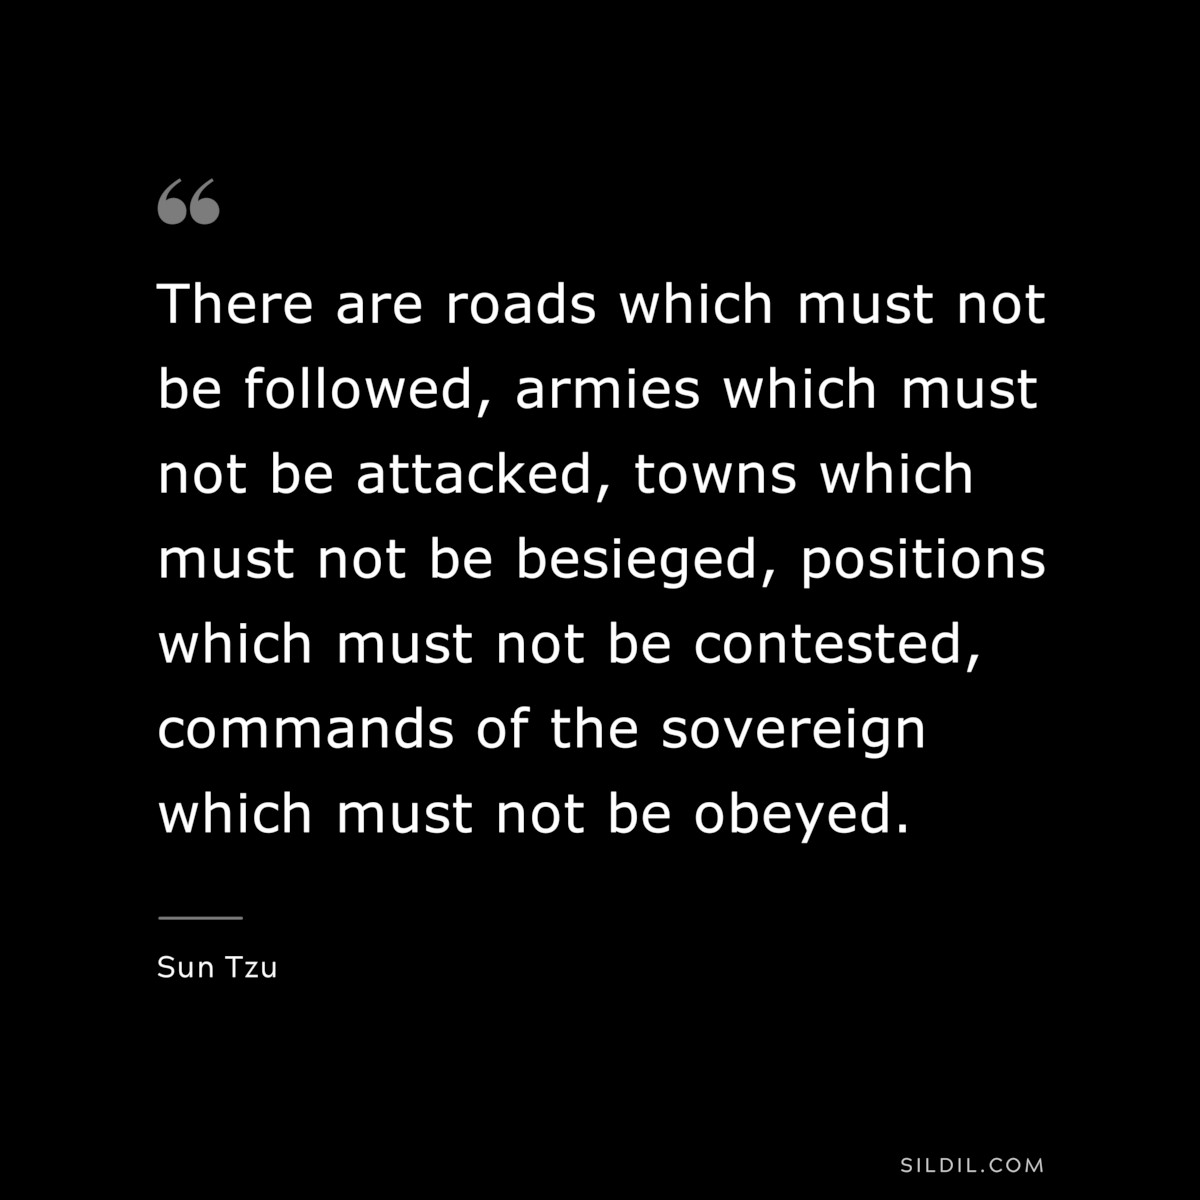 There are roads which must not be followed, armies which must not be attacked, towns which must not be besieged, positions which must not be contested, commands of the sovereign which must not be obeyed.― Sun Tzu